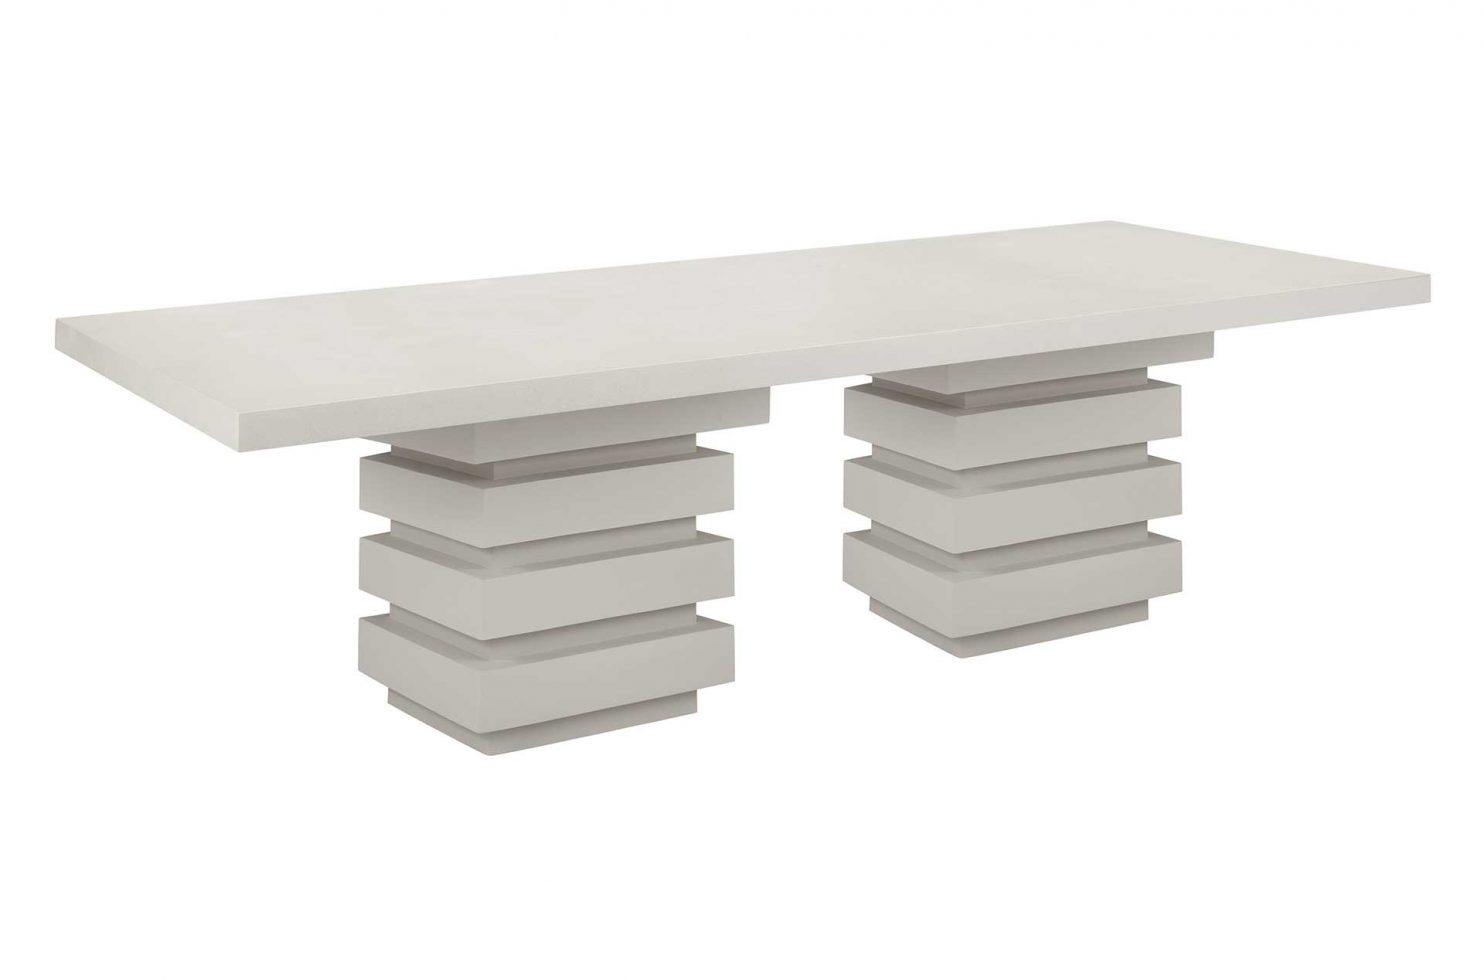 prov frp meditation rectangle dining table 108in limestone S1567134772 3Q front above web